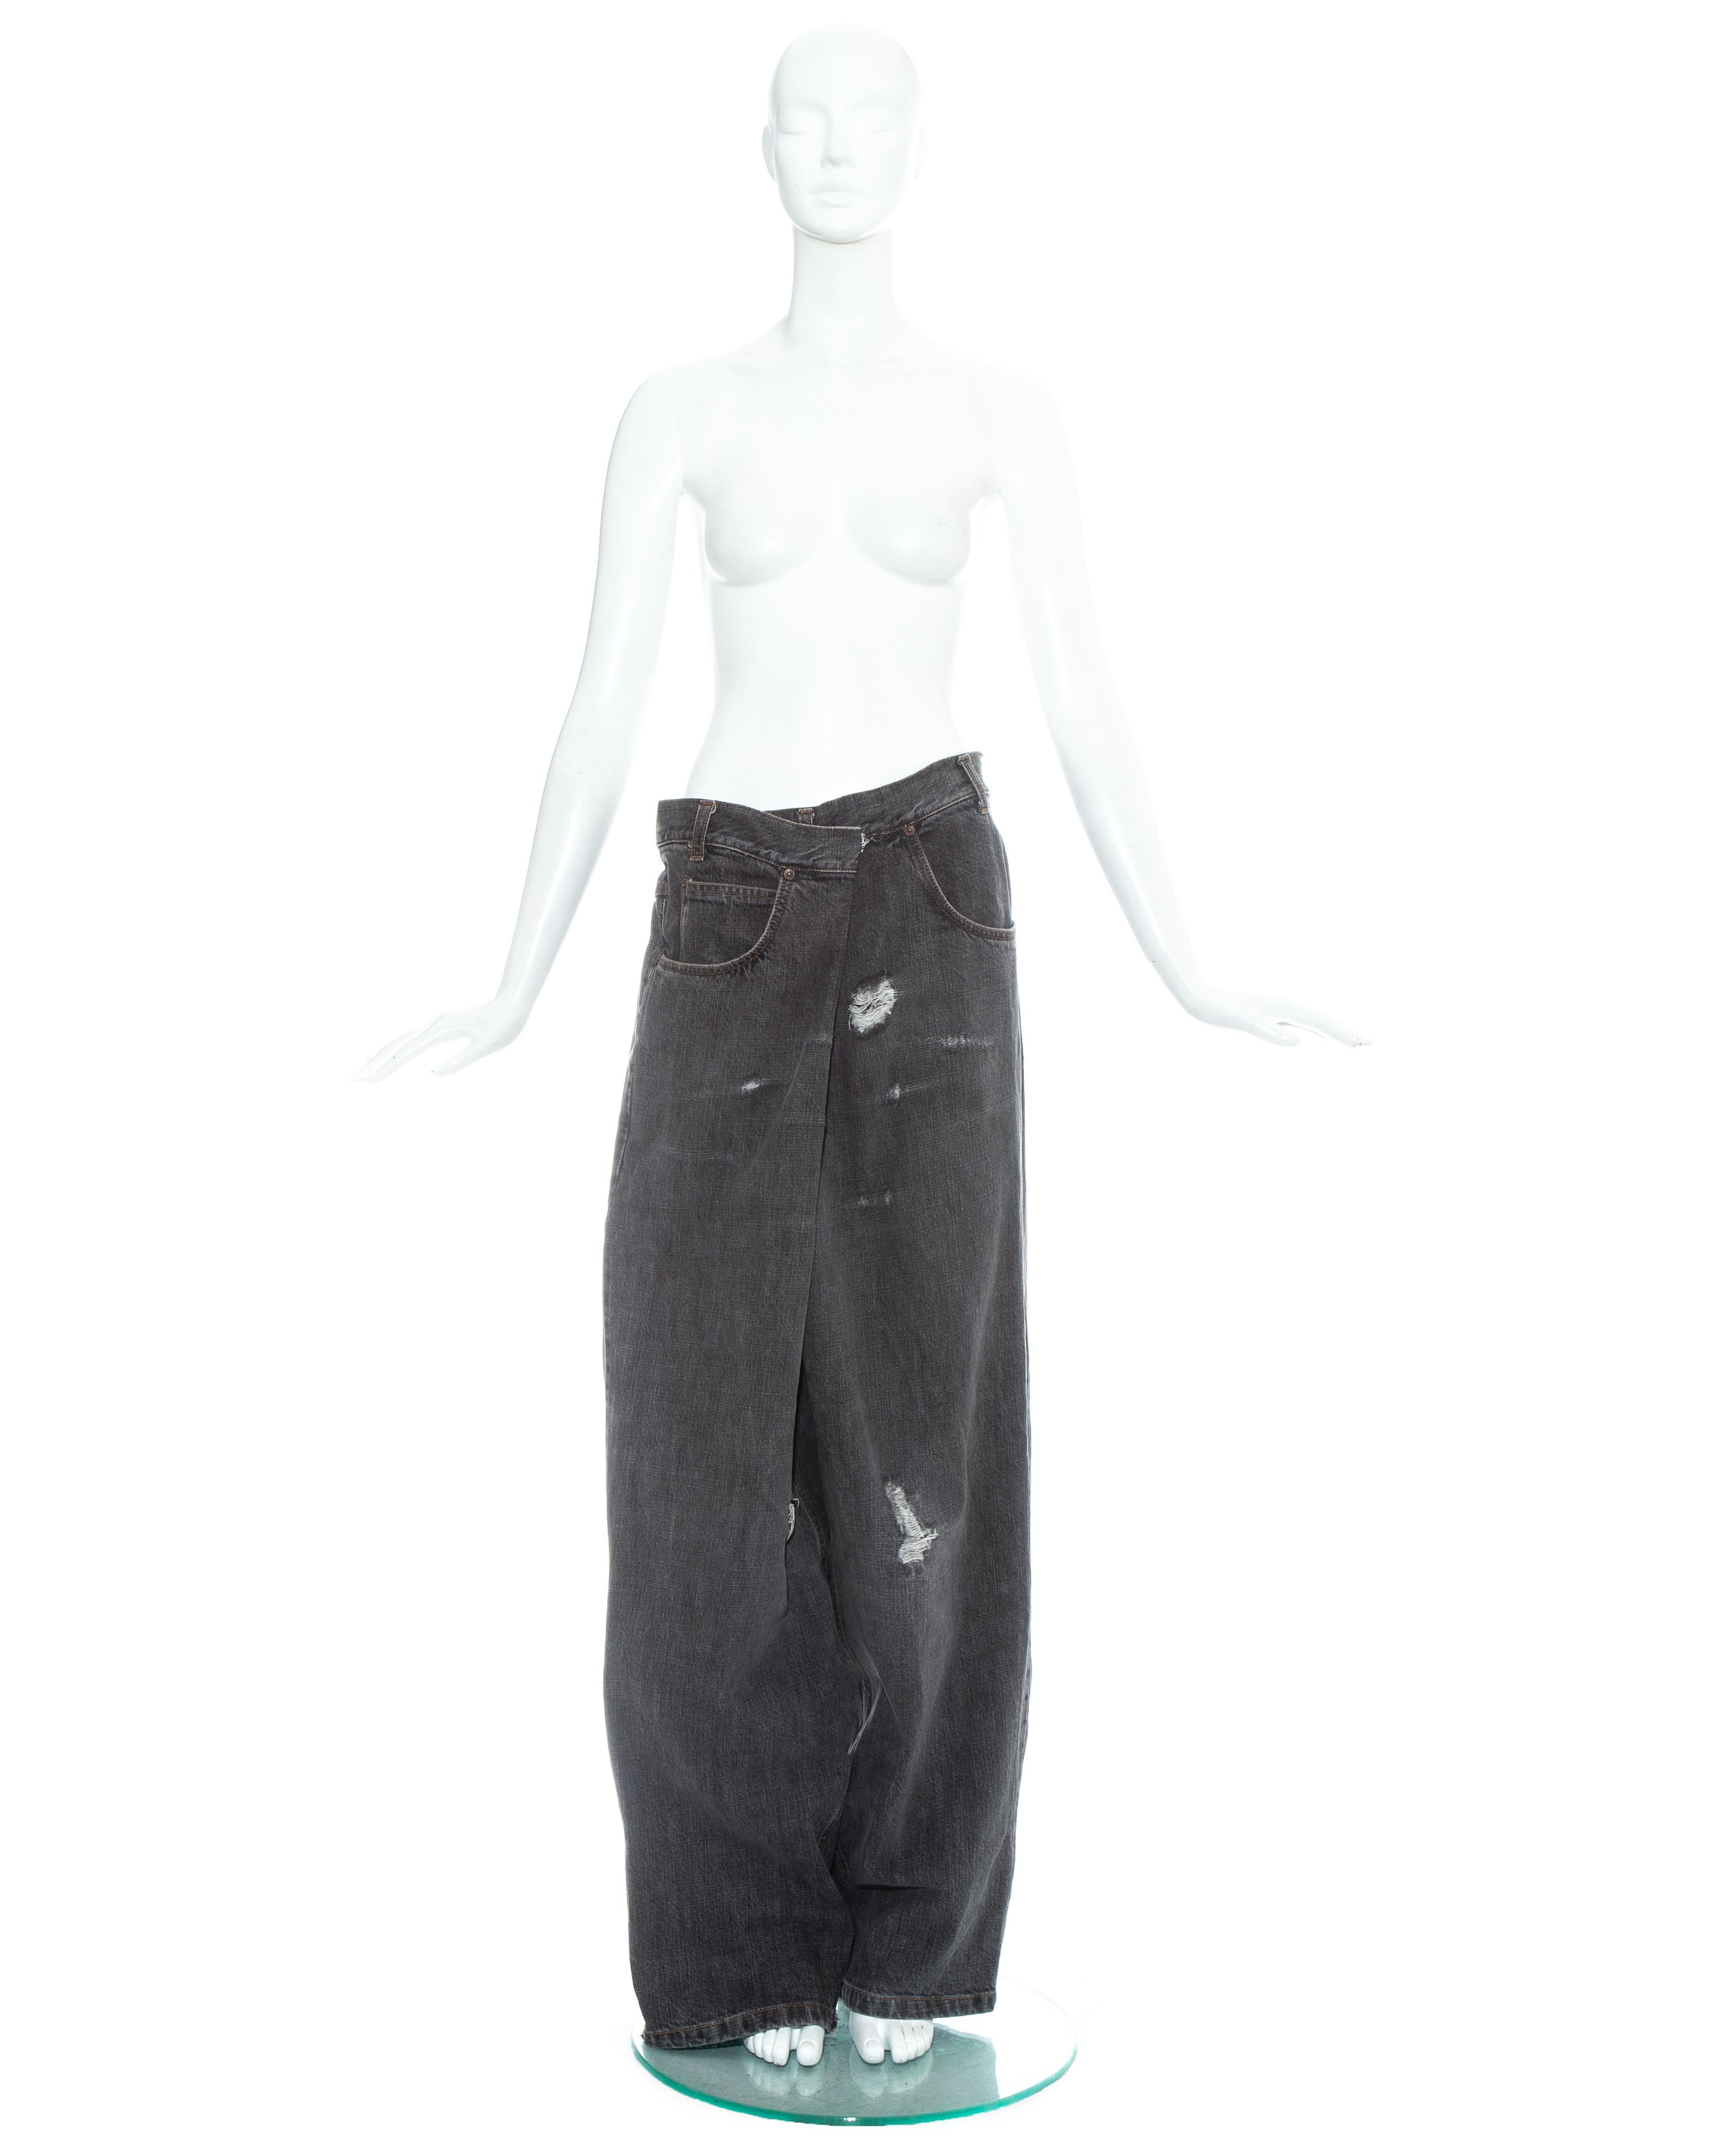 Martin Margiela; grey denim oversized jeans. Size IT 78 reconstructed to fit a size Medium. Artificial distressed design, box pleat at the centre back, wrap design at front fastening with a hook and eye closure.   

Fall-Winter 2000
